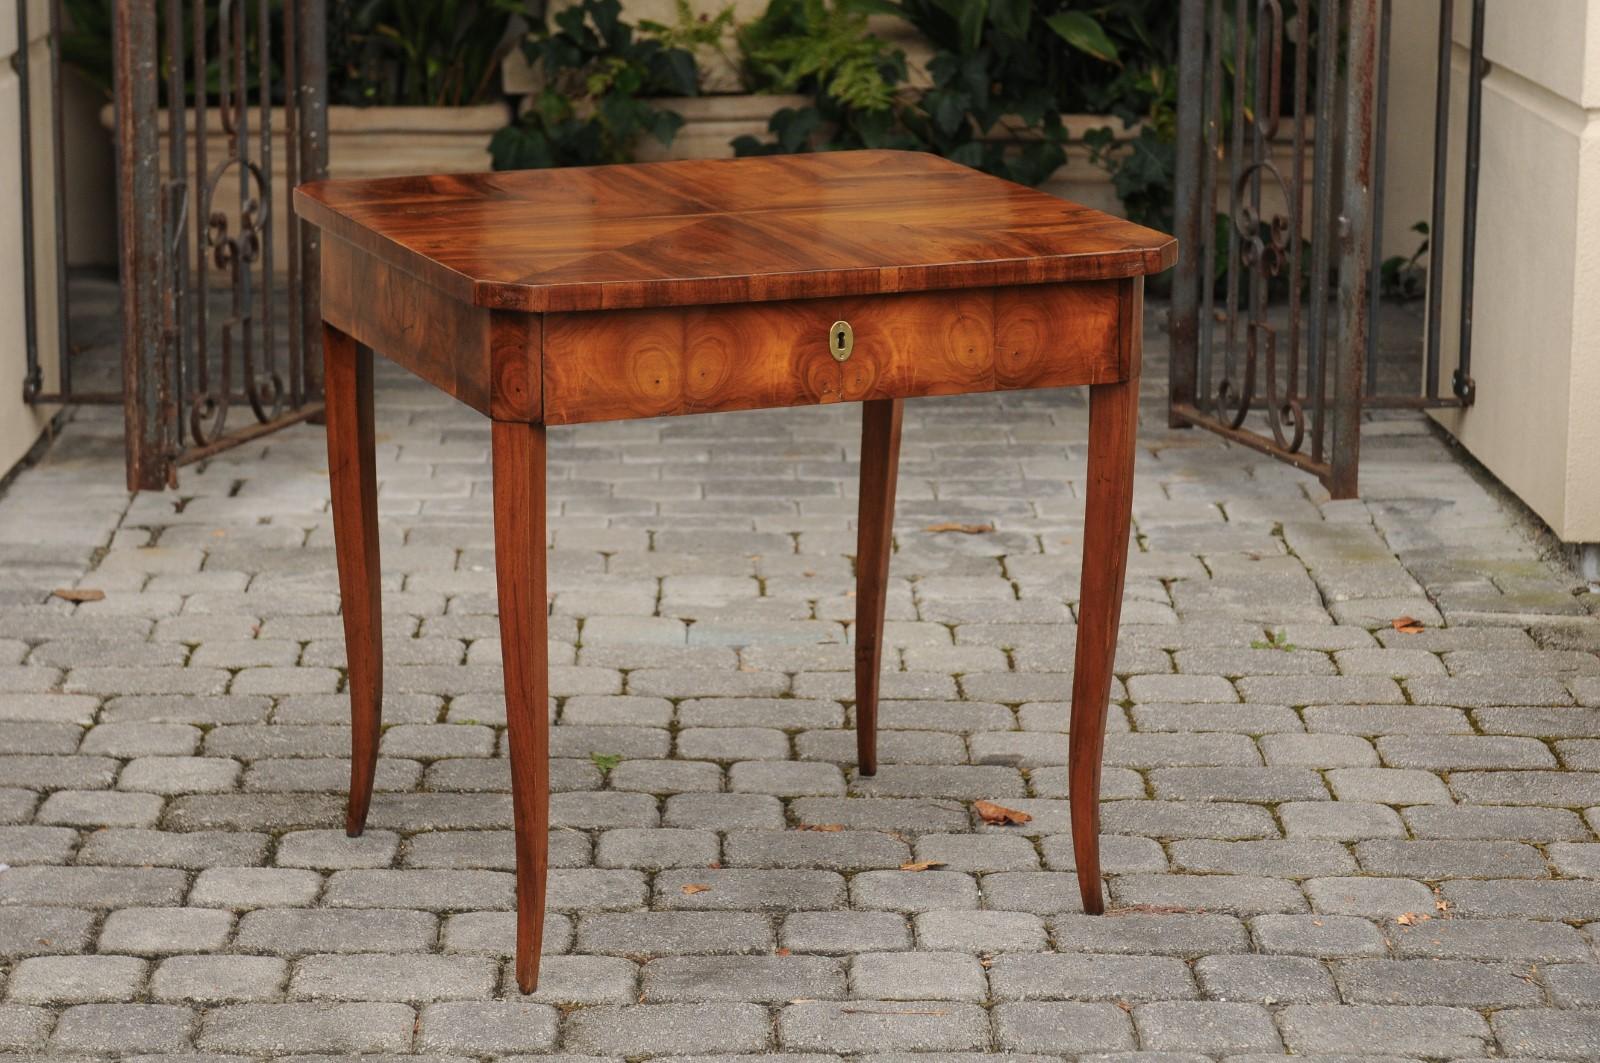 An Austrian Biedermeier walnut table from the first half of the 19th century with bookmark veneered top and oyster veneered apron. Born during the second quarter of the 19th century, this Austrian Biedermeier table features a rectangular top with